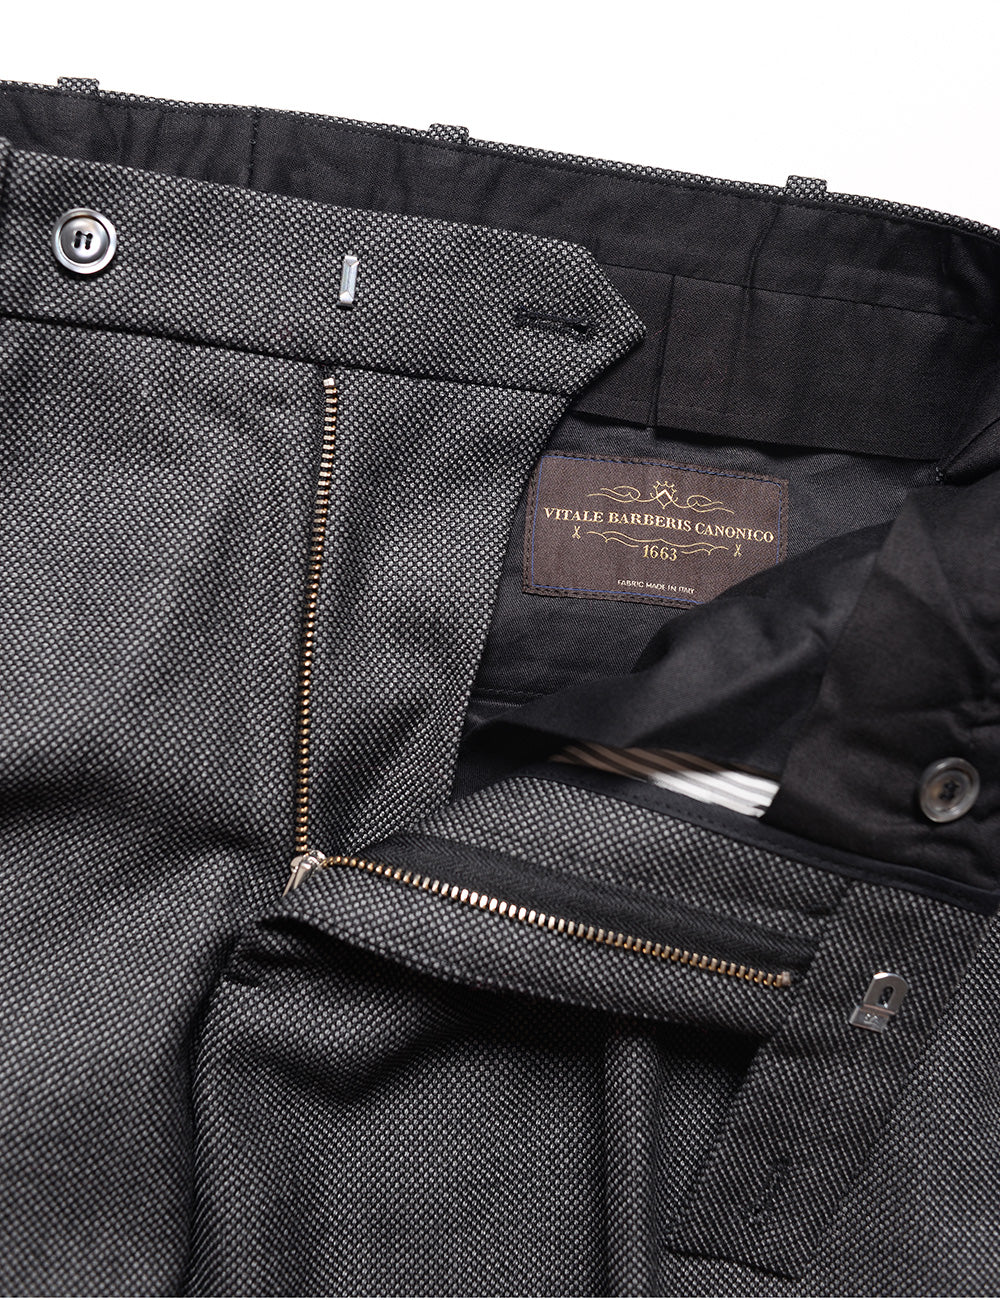 Detail shot of Brooklyn Tailors BKT50 Tailored Trousers in Birdseye Weave - Storm Gray showing zipper, interior lining, and waistband